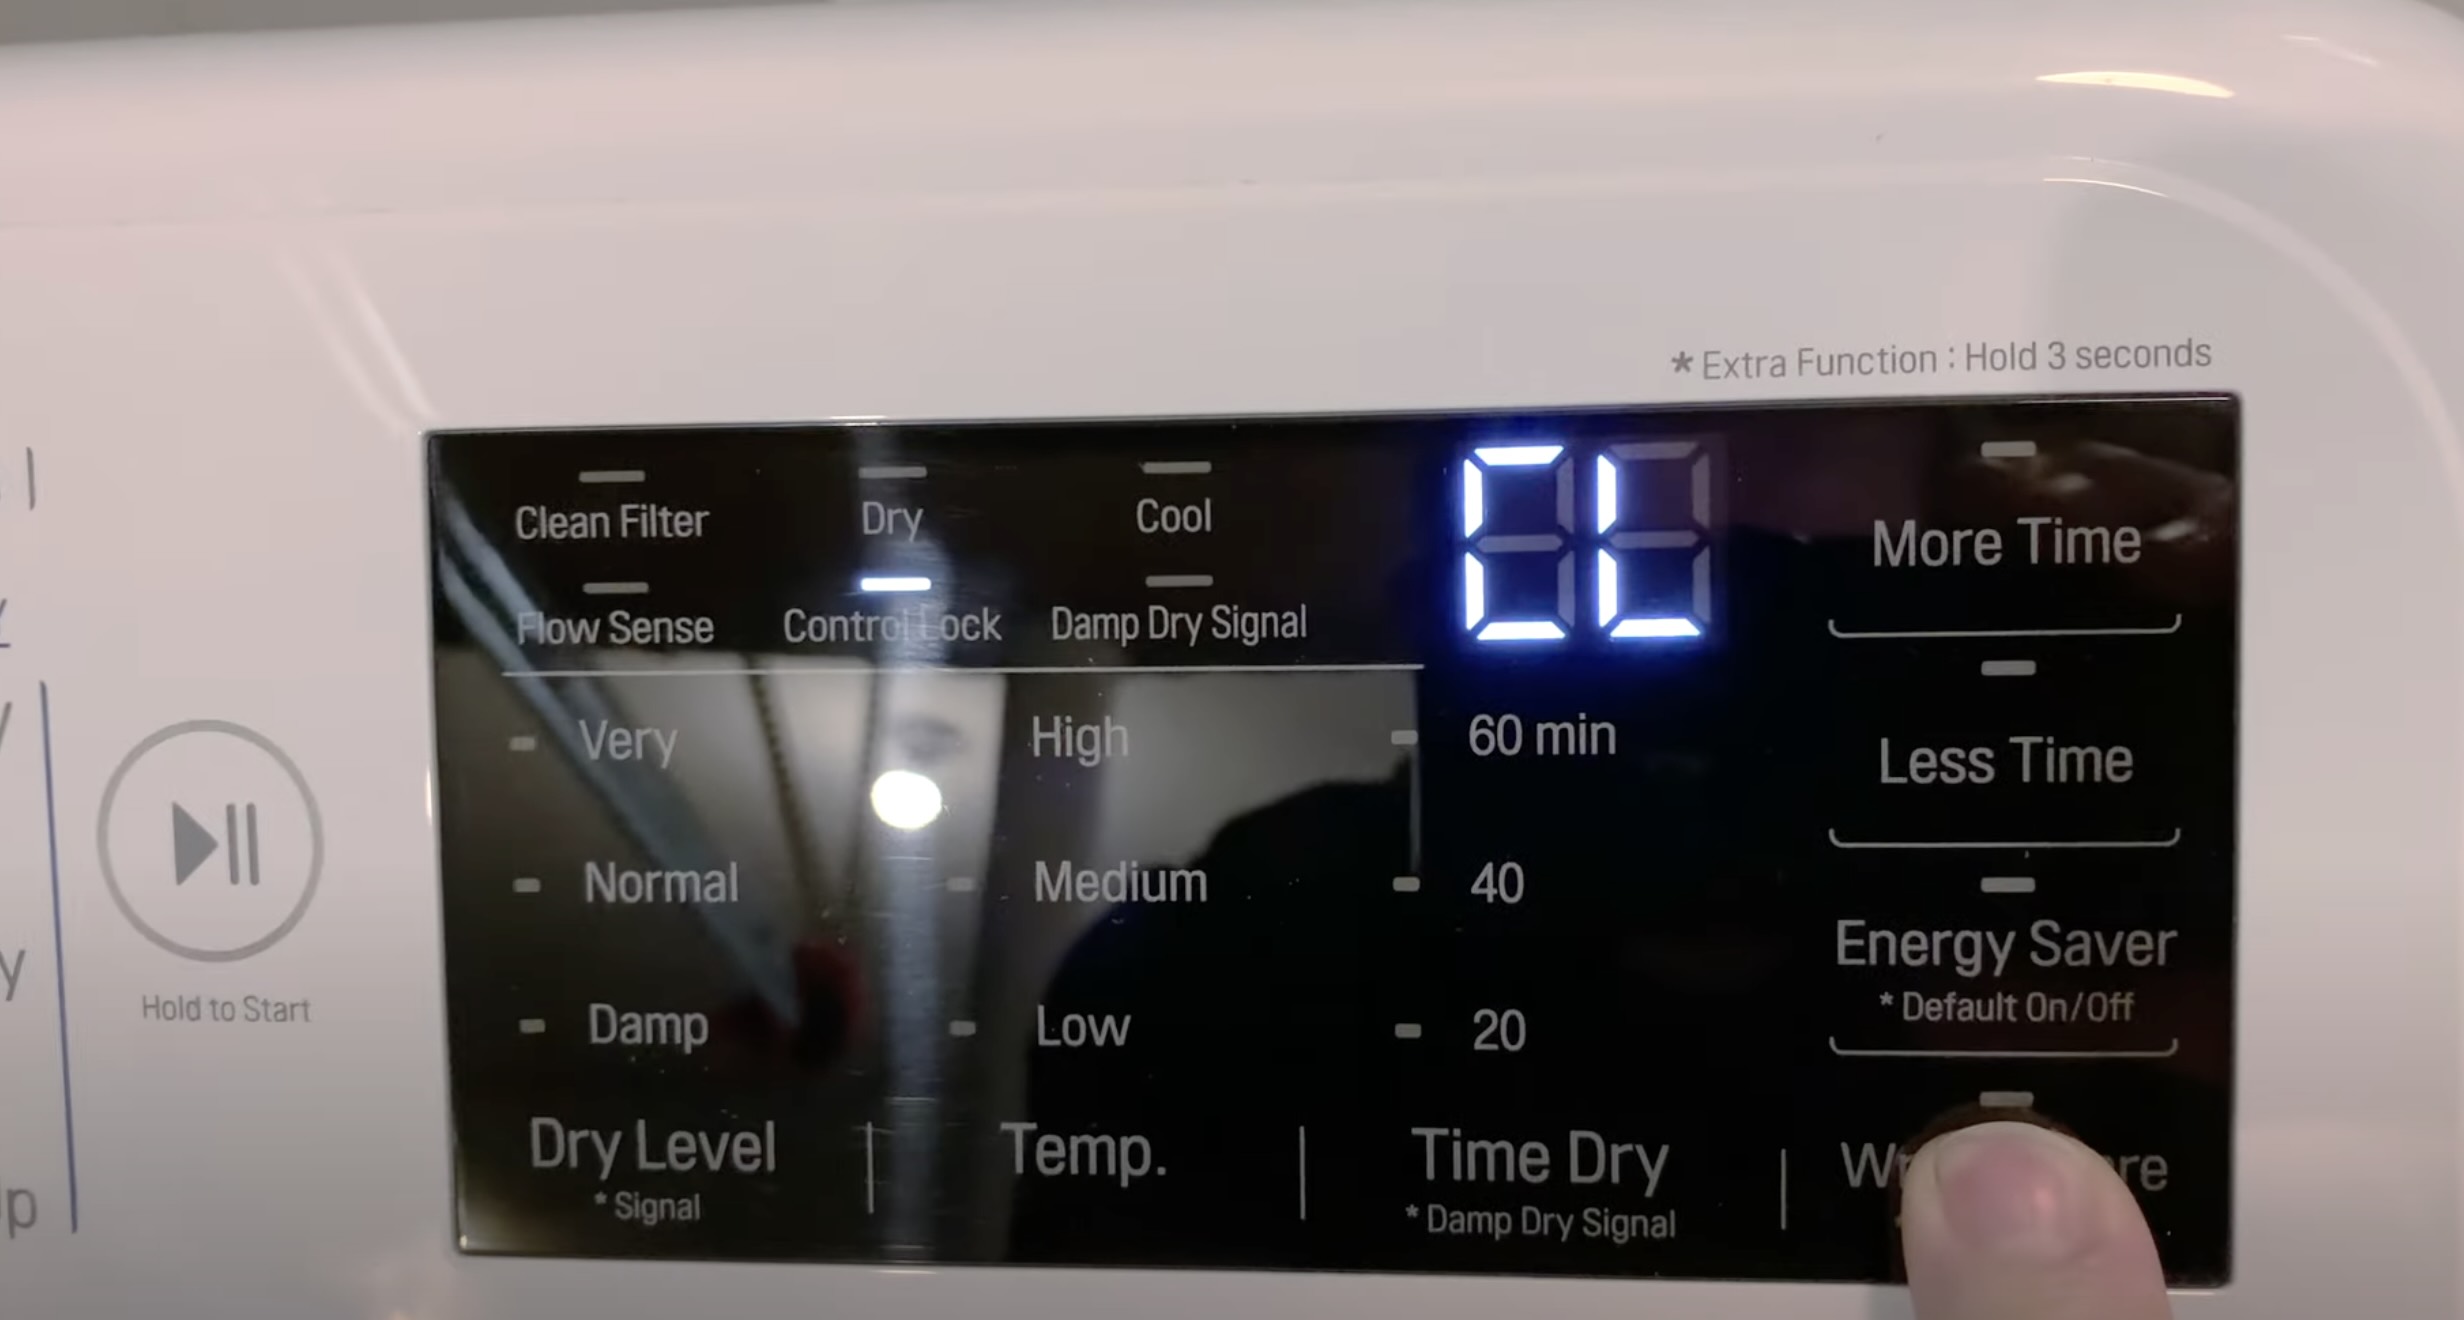 https://storables.com/wp-content/uploads/2024/02/what-does-cl-mean-on-lg-washing-machine-1708399246.jpg